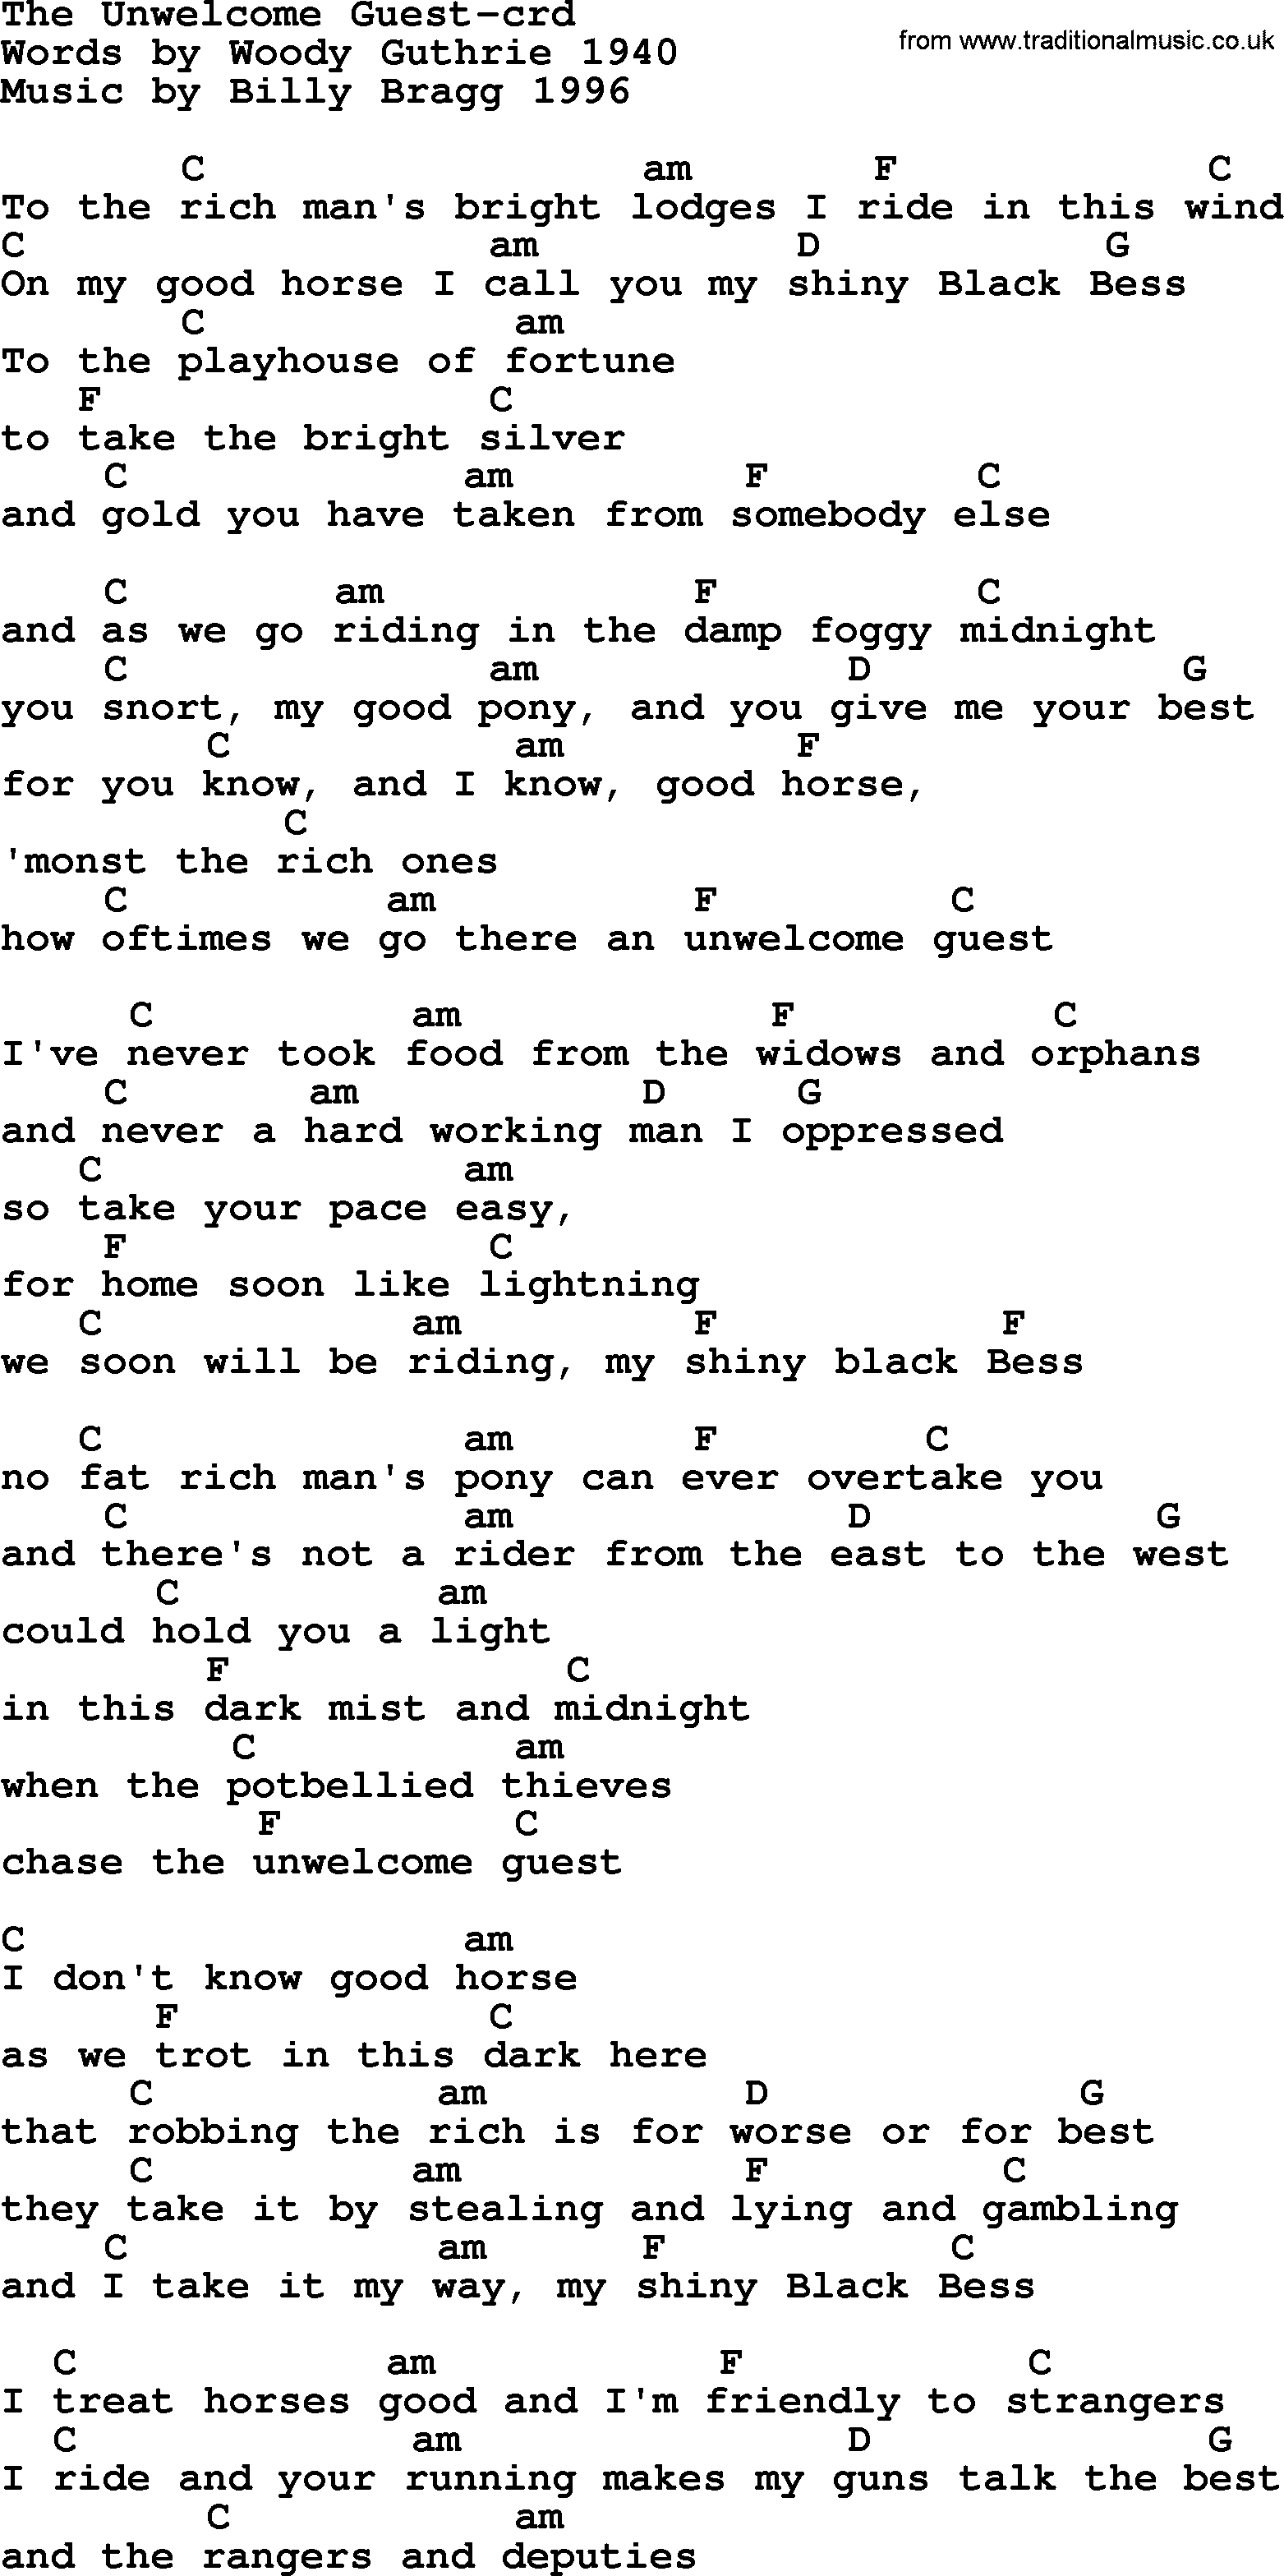 Woody Guthrie song The Unwelcome Guest lyrics and chords